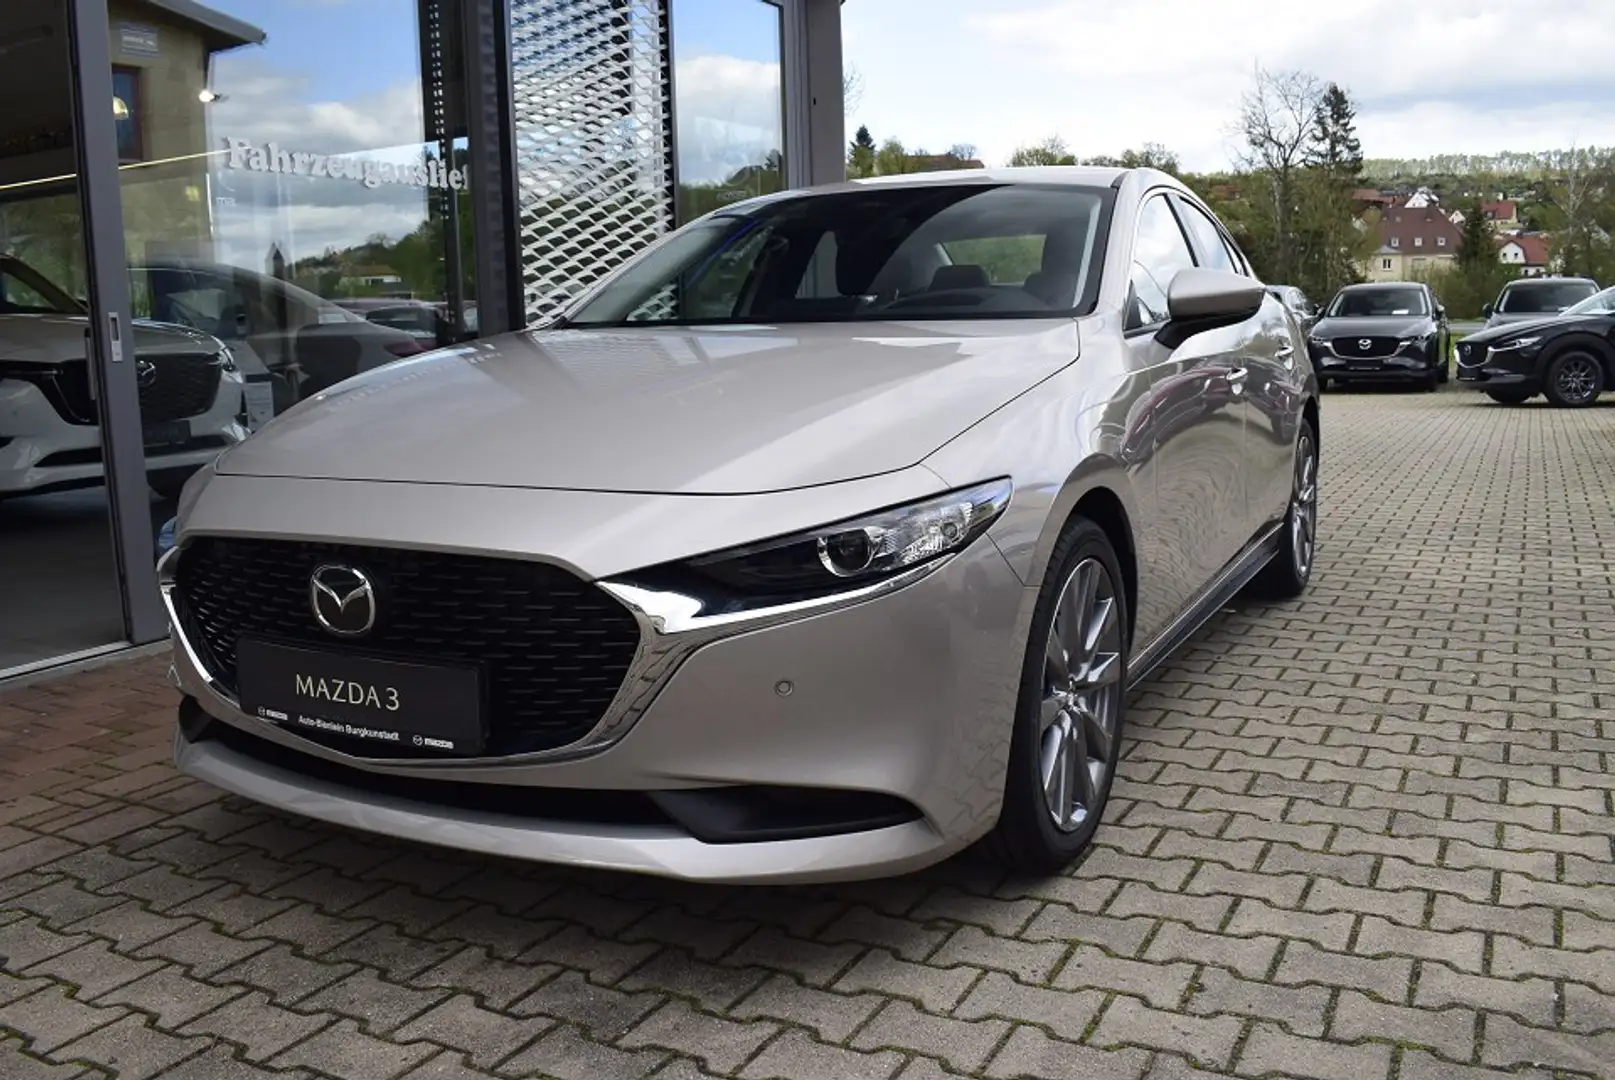 Mazda 3 2.0 150PS Exclusive-Line Voll-LED Navi LogIn Sitzh Silber - 2